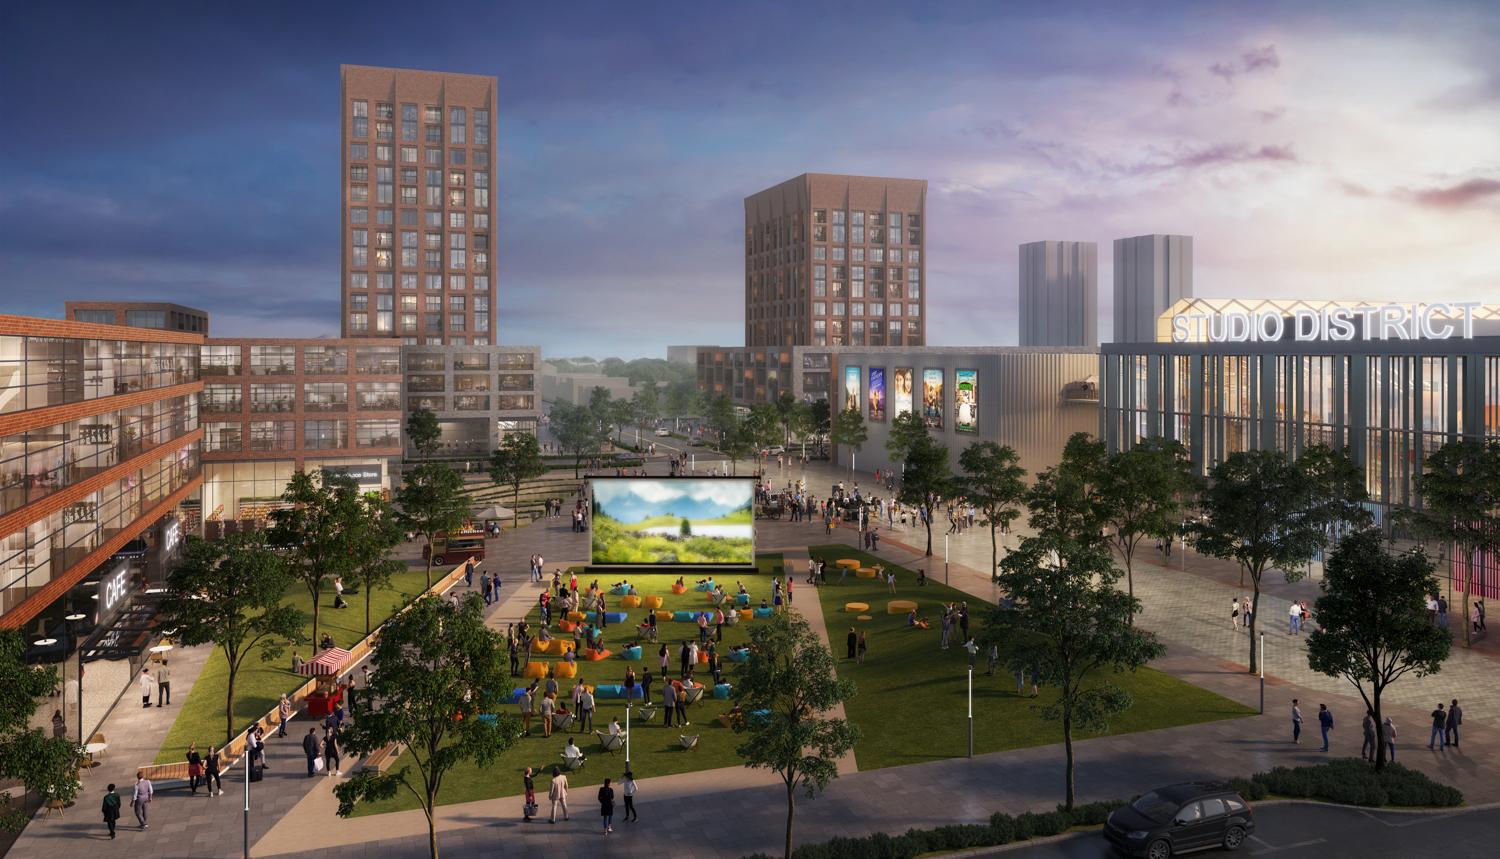 rendering of a vibrant public gathering area with colourful seating and a large outdoor movie screen, surrounded by office buildings, residential towers and film production space